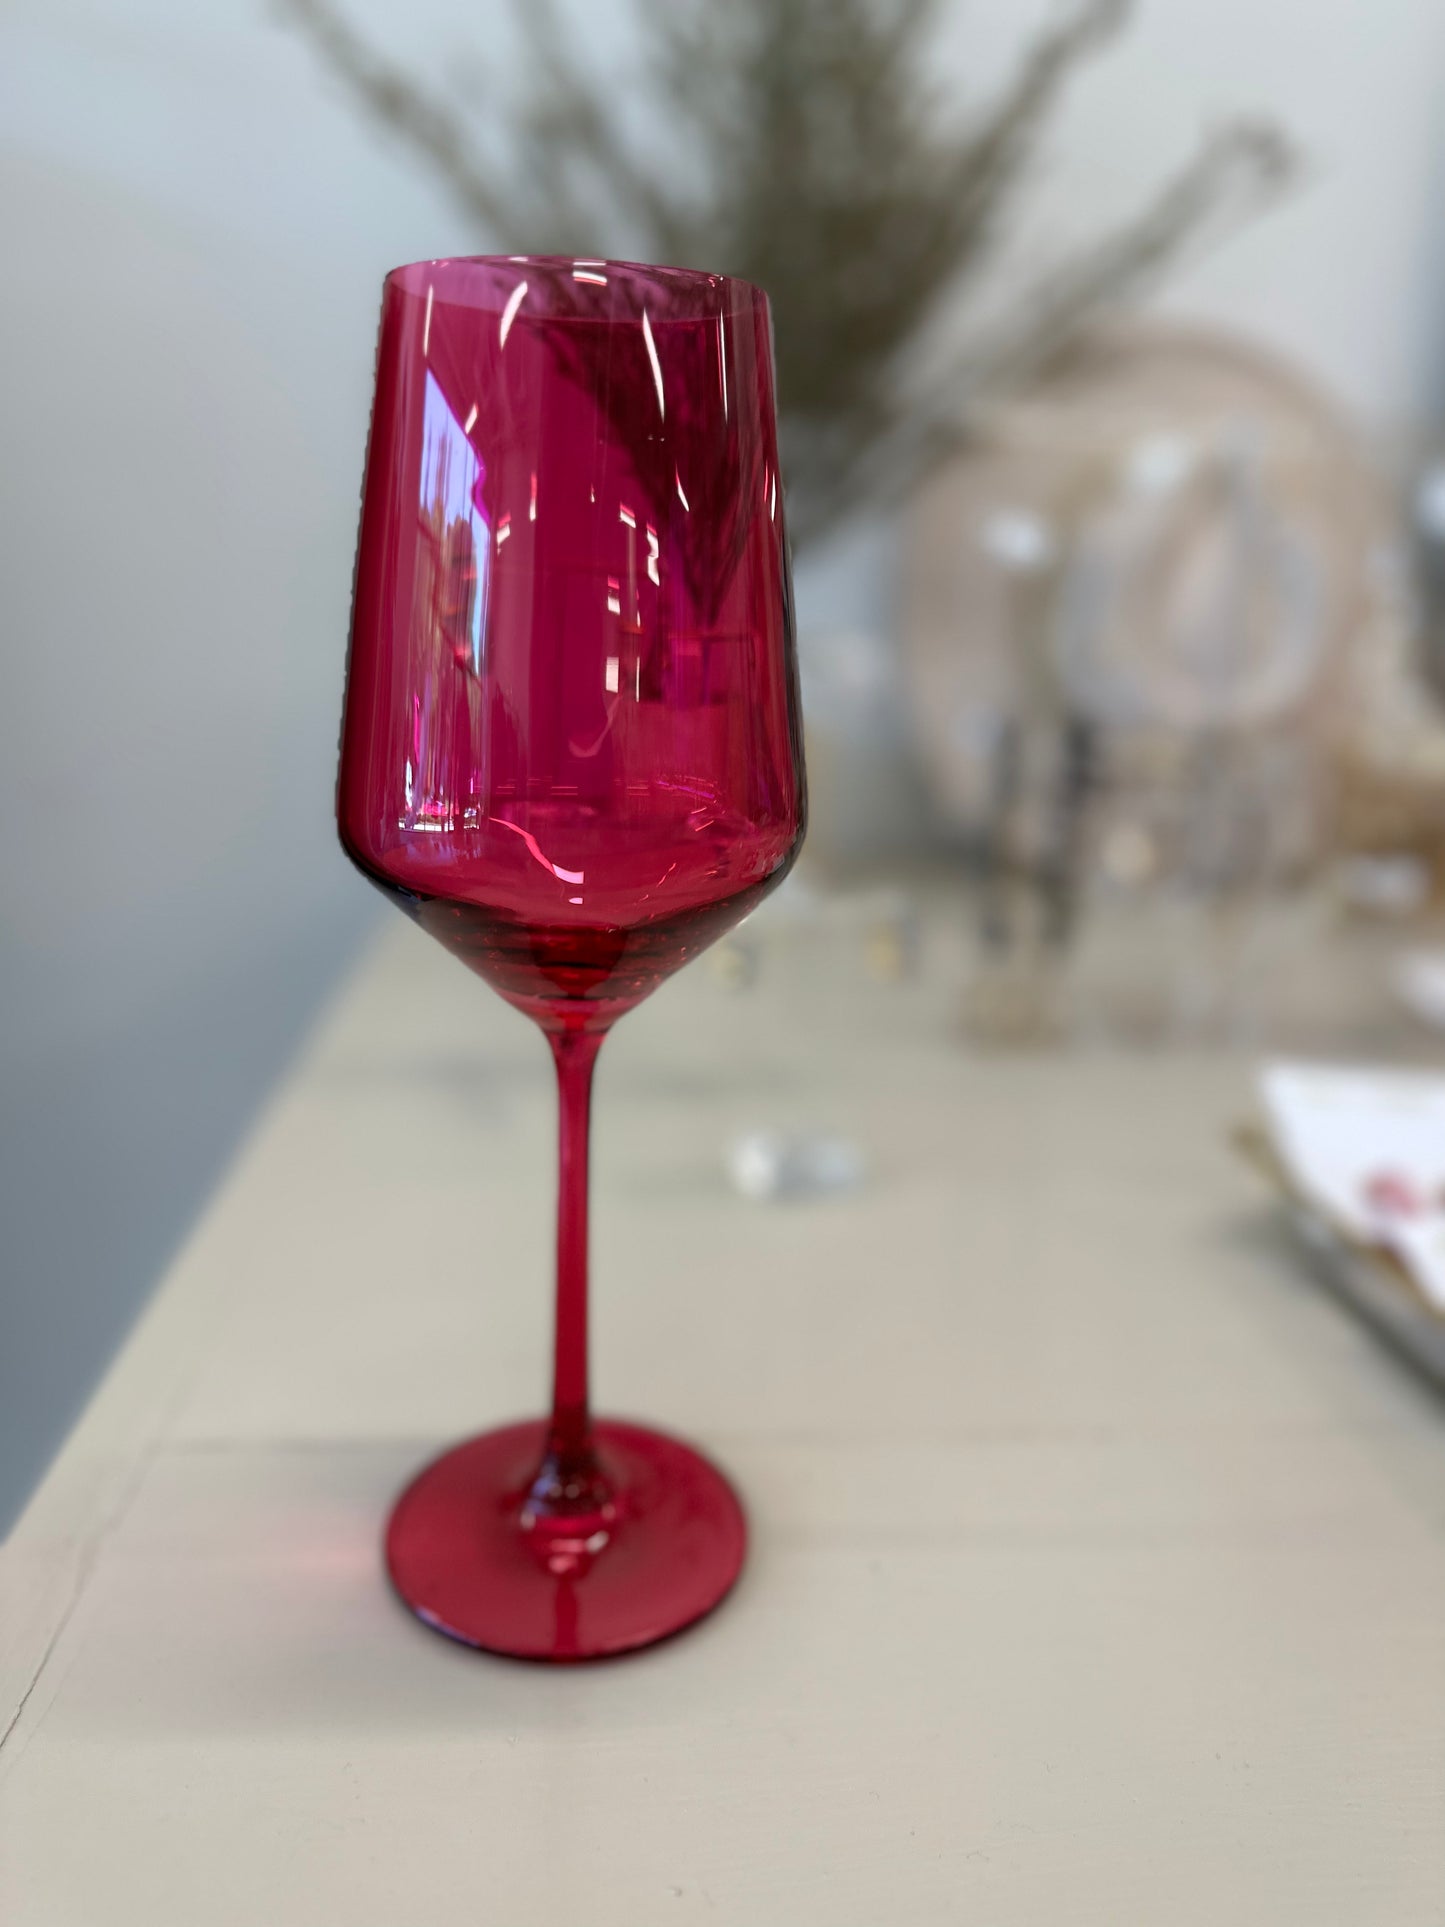 The Carter Glass in Magenta